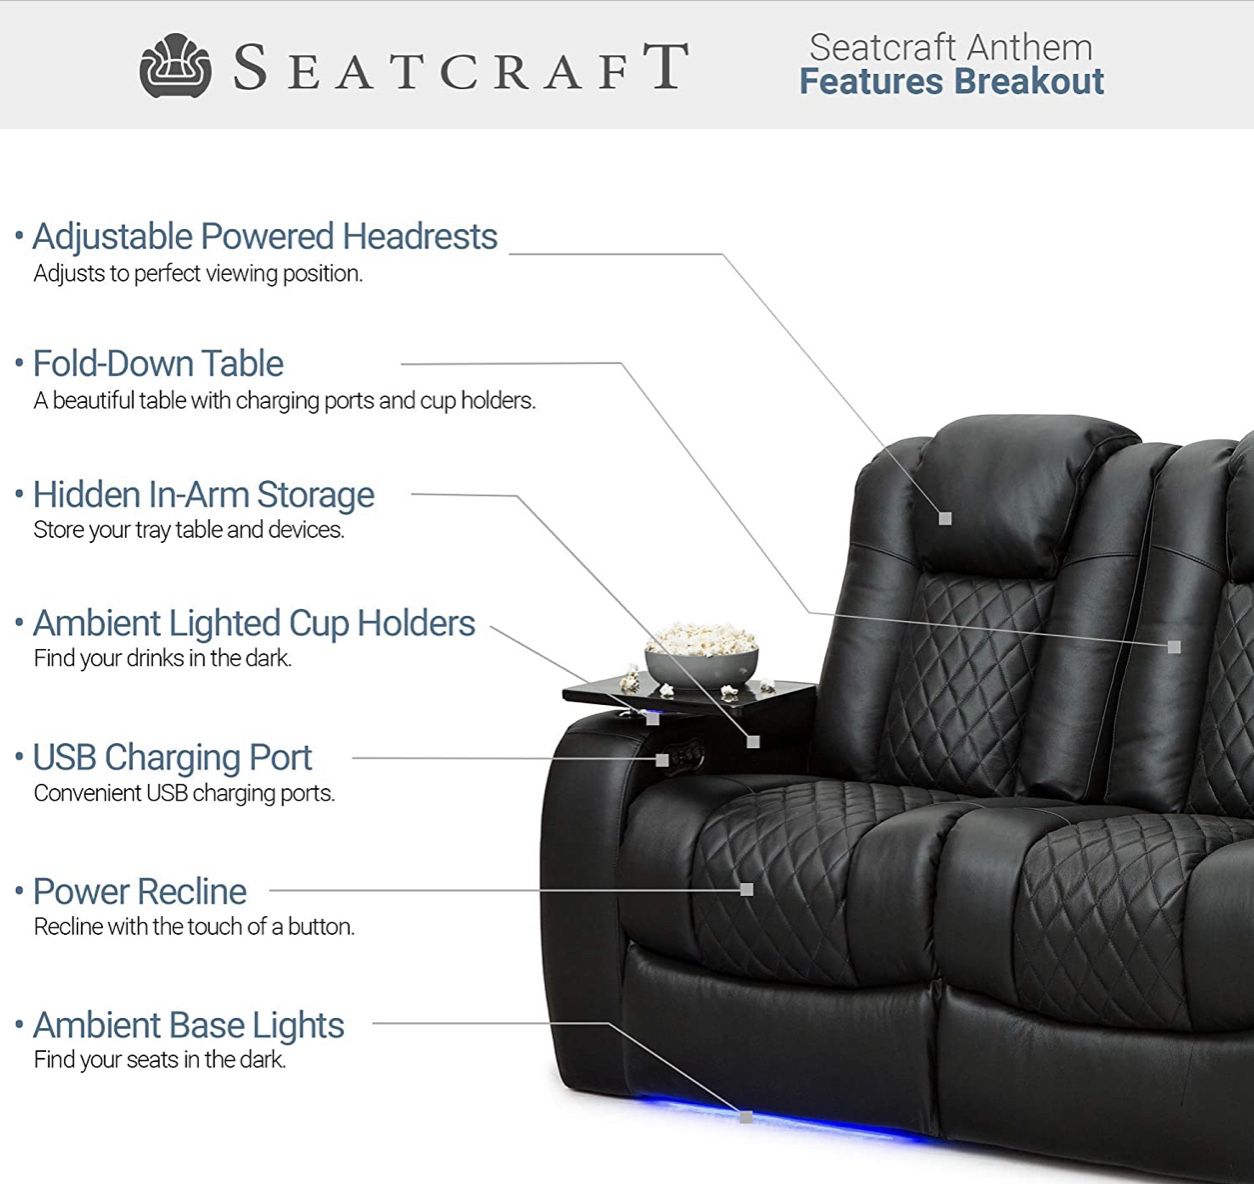 Black Leather Luxury Comfort Electric Couch & Recliner Set - Light Up Blue LEDs, Hidden Compartments, & More!